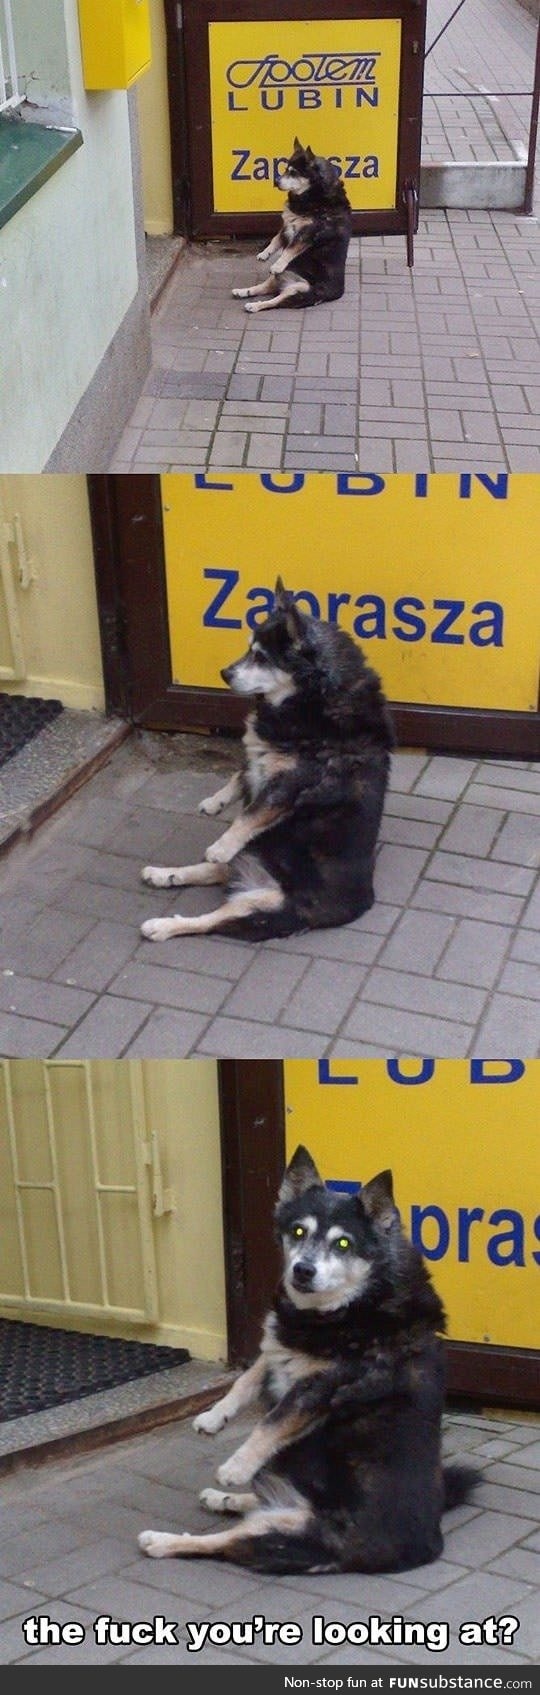 This dog is waiting for his master like a boss!